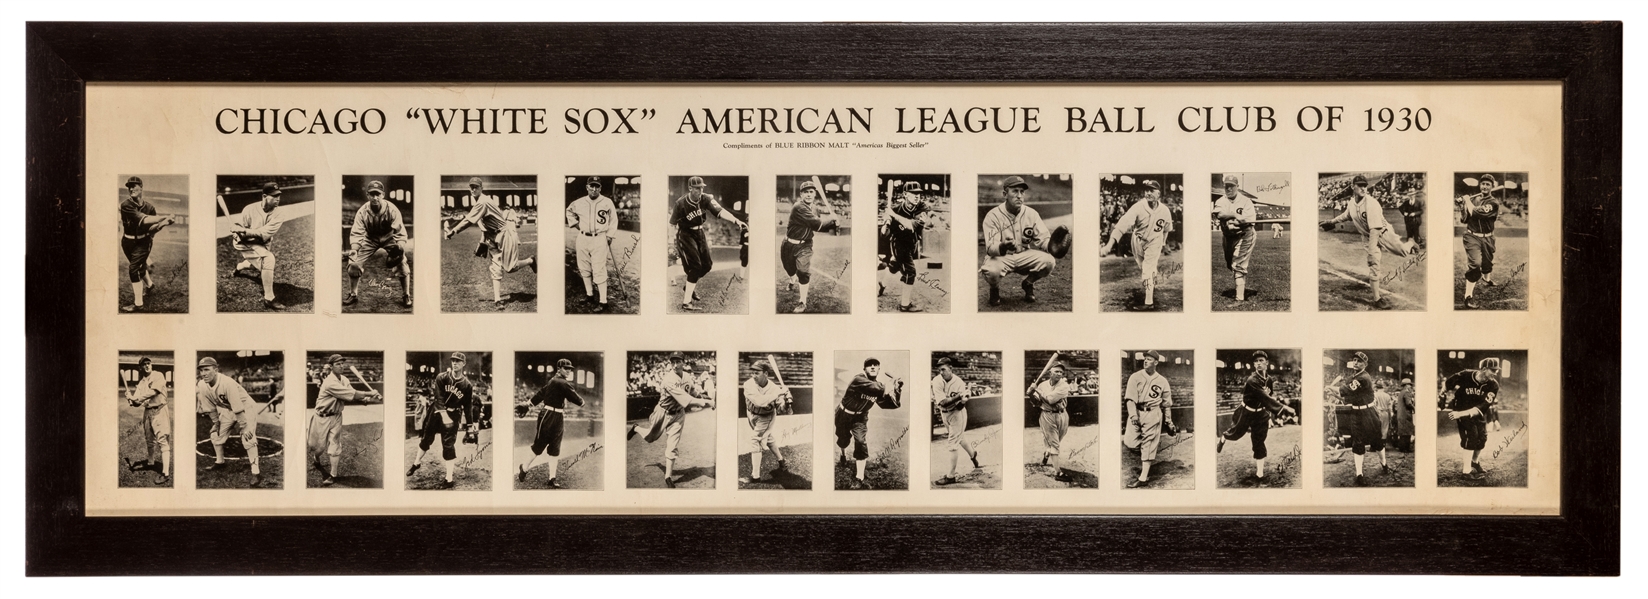 Chicago White Sox 1930 Panoramic Composite.